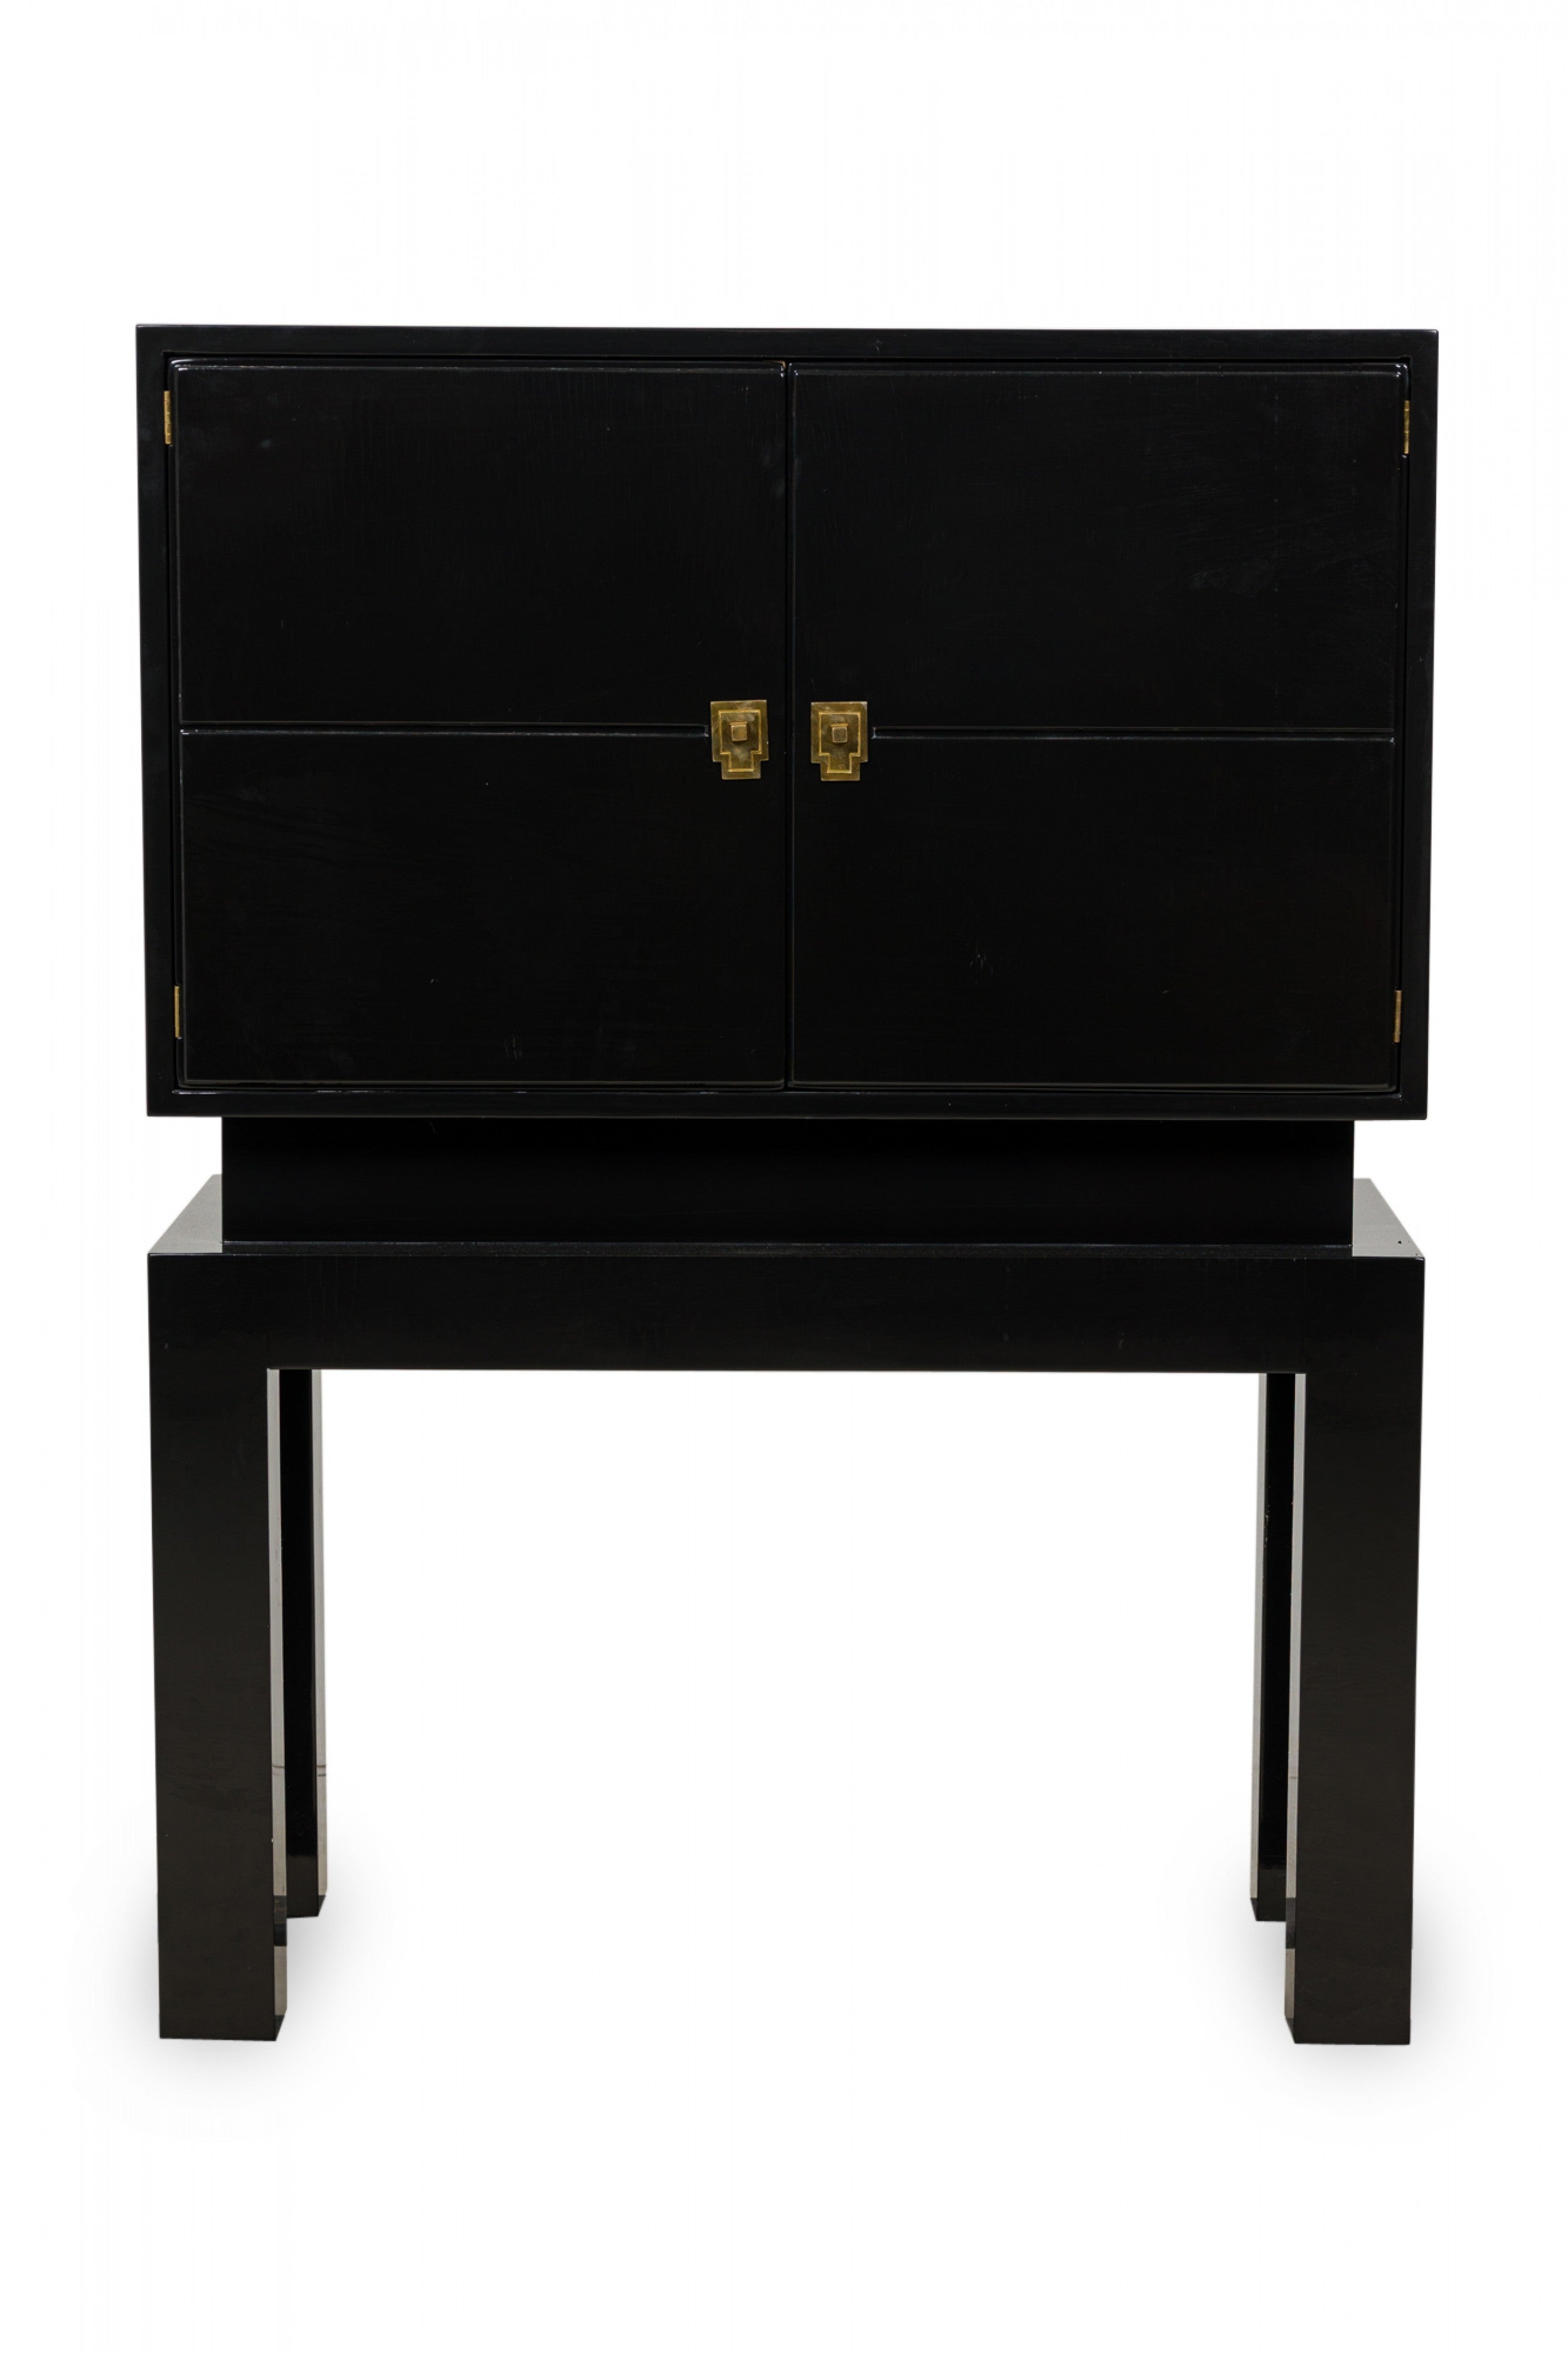 Tommi Parzinger Midcentury American Modern Black Lacquered Bar Cabinet